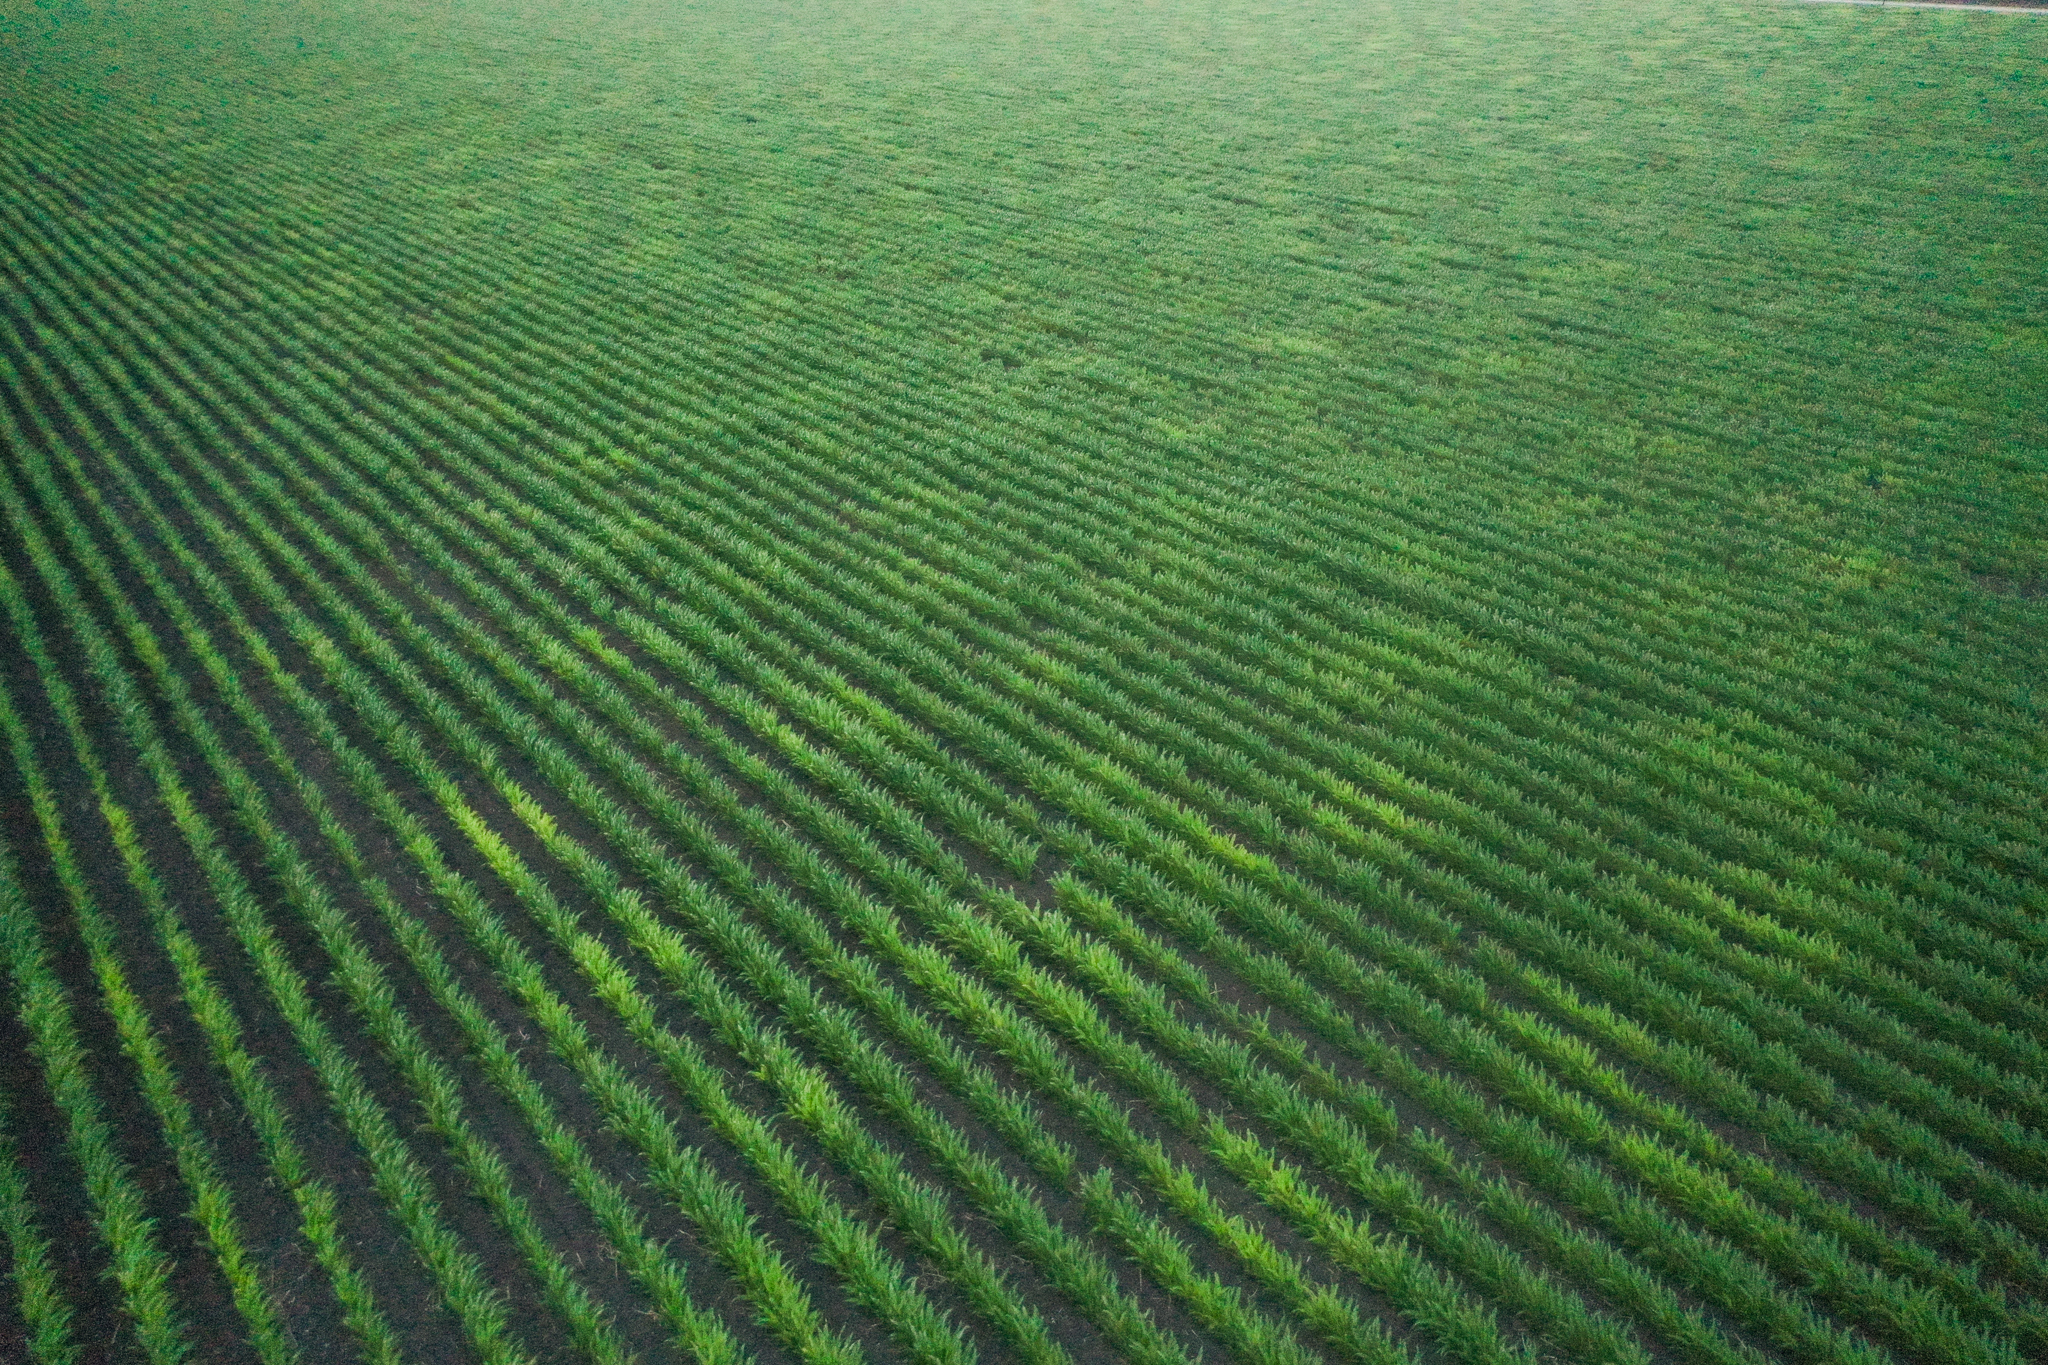 Lines formed from sorghum plantings along the Texas gulf coast